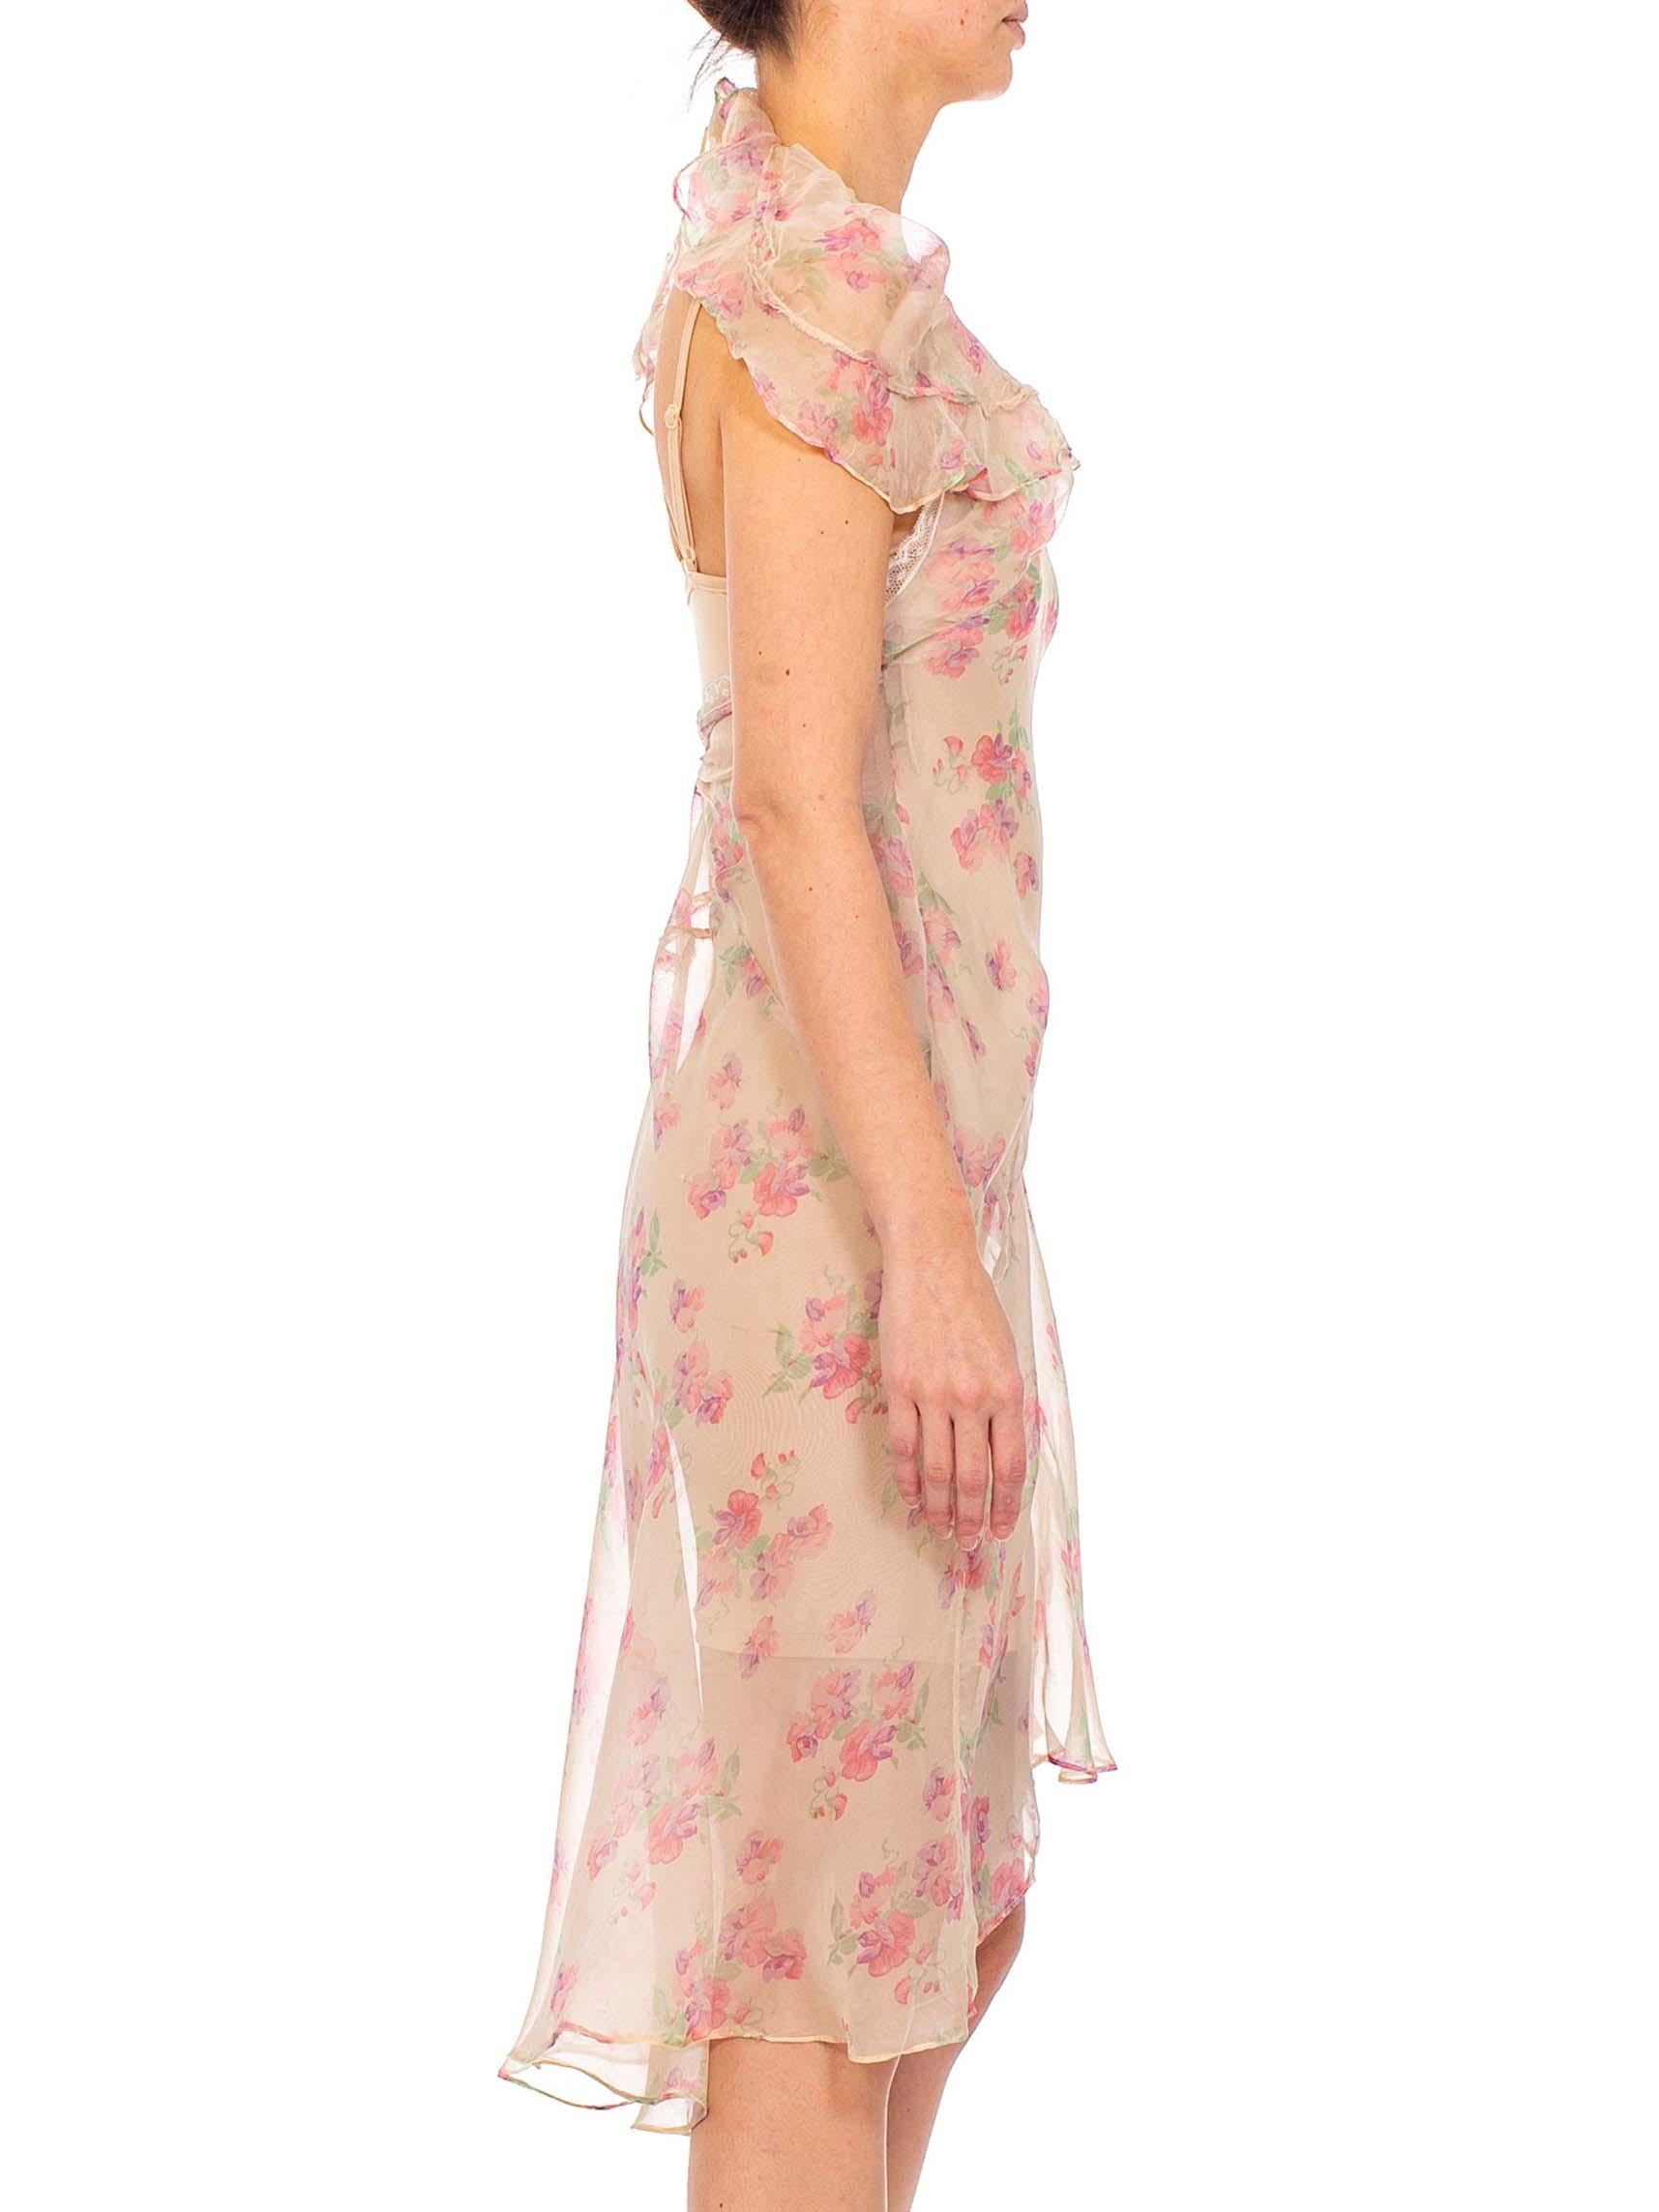 MORPHEW COLLECTION Baby Pink Floral Silk Chiffon Dress With Ruffle Cape Back 4